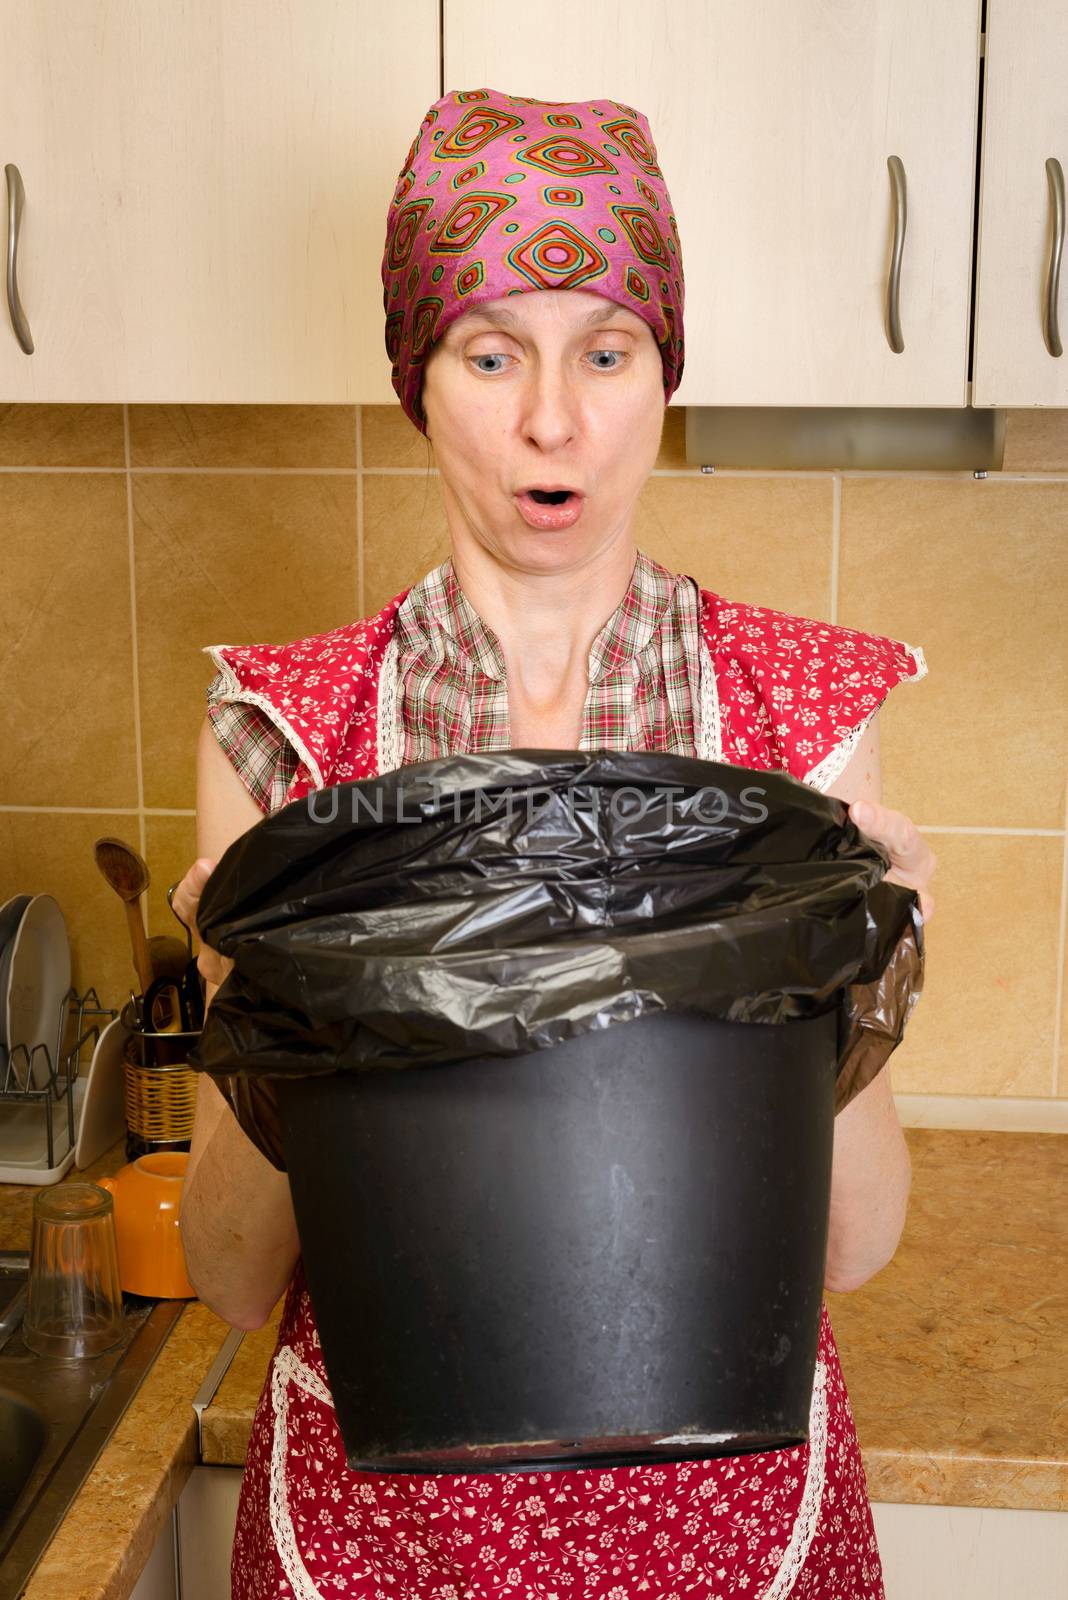 A woman, with a scarf on the head and a red apron, is looking inside a black trash can with a garbage bag, in the kitchen. She is very disturbed by the bad smell